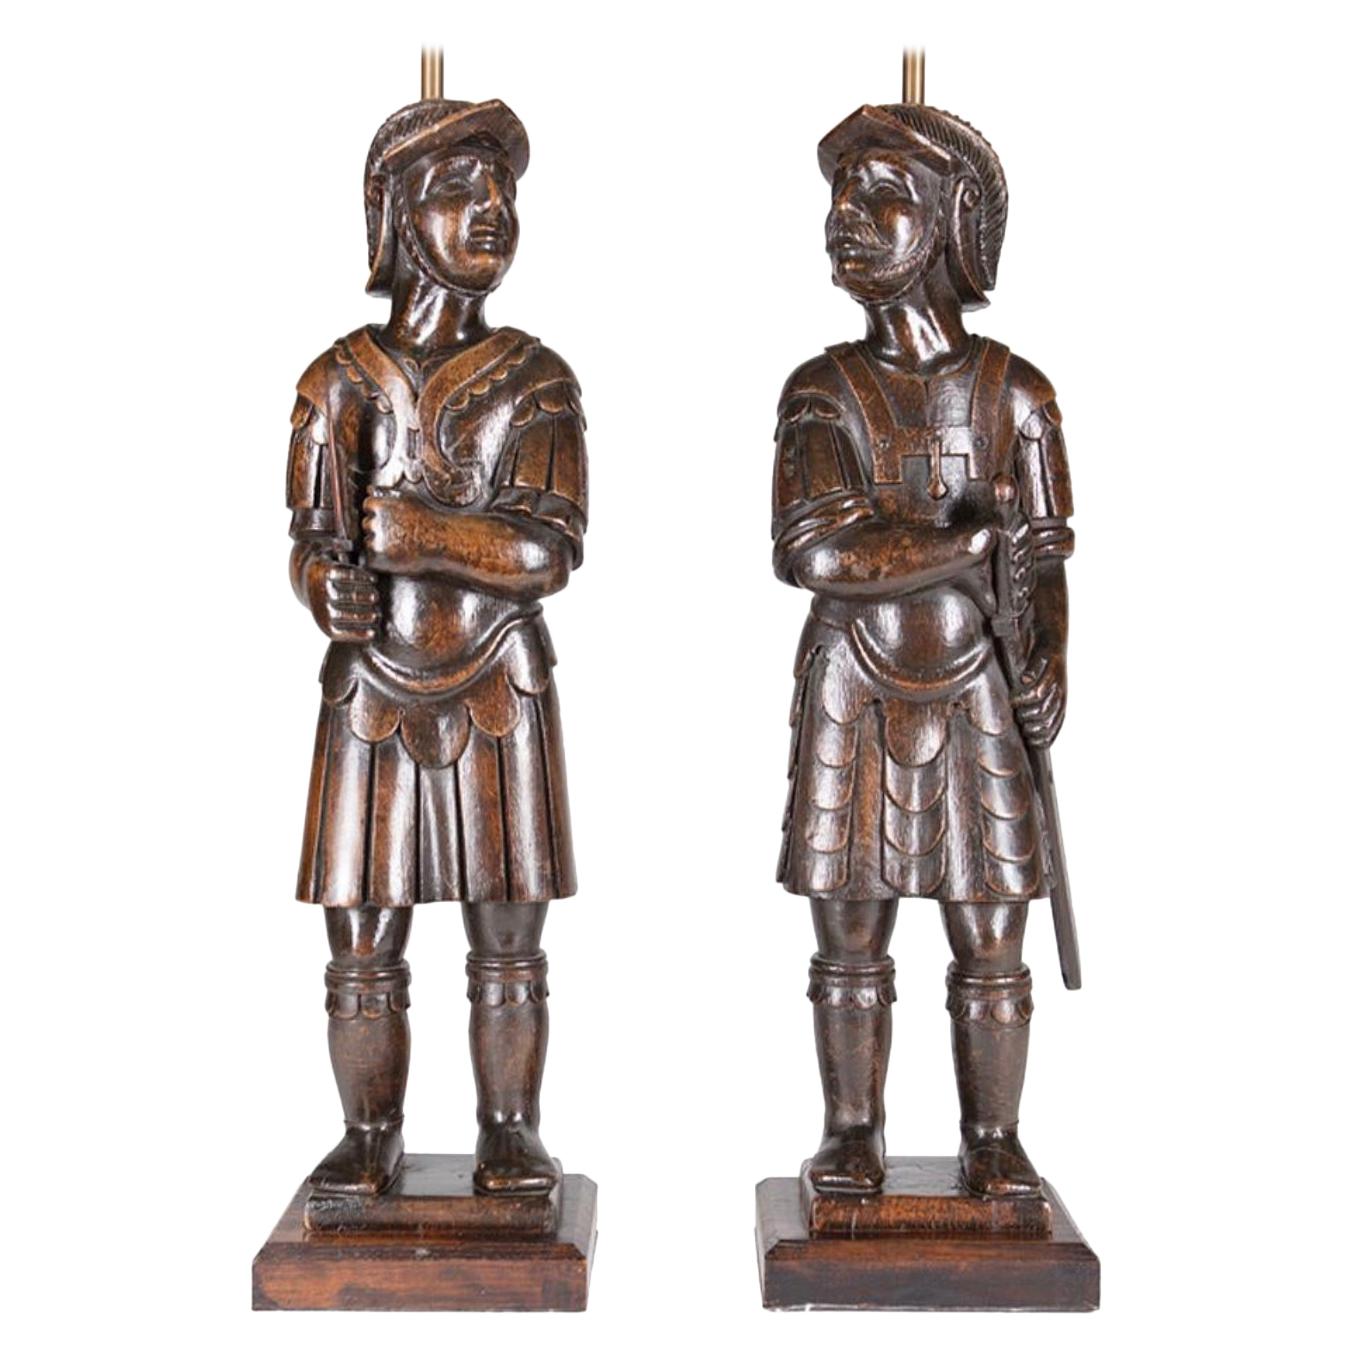 Pair of late 19th-early 20th century Gothic Revival carved warriors mounted as lamps 

Measures 23.5